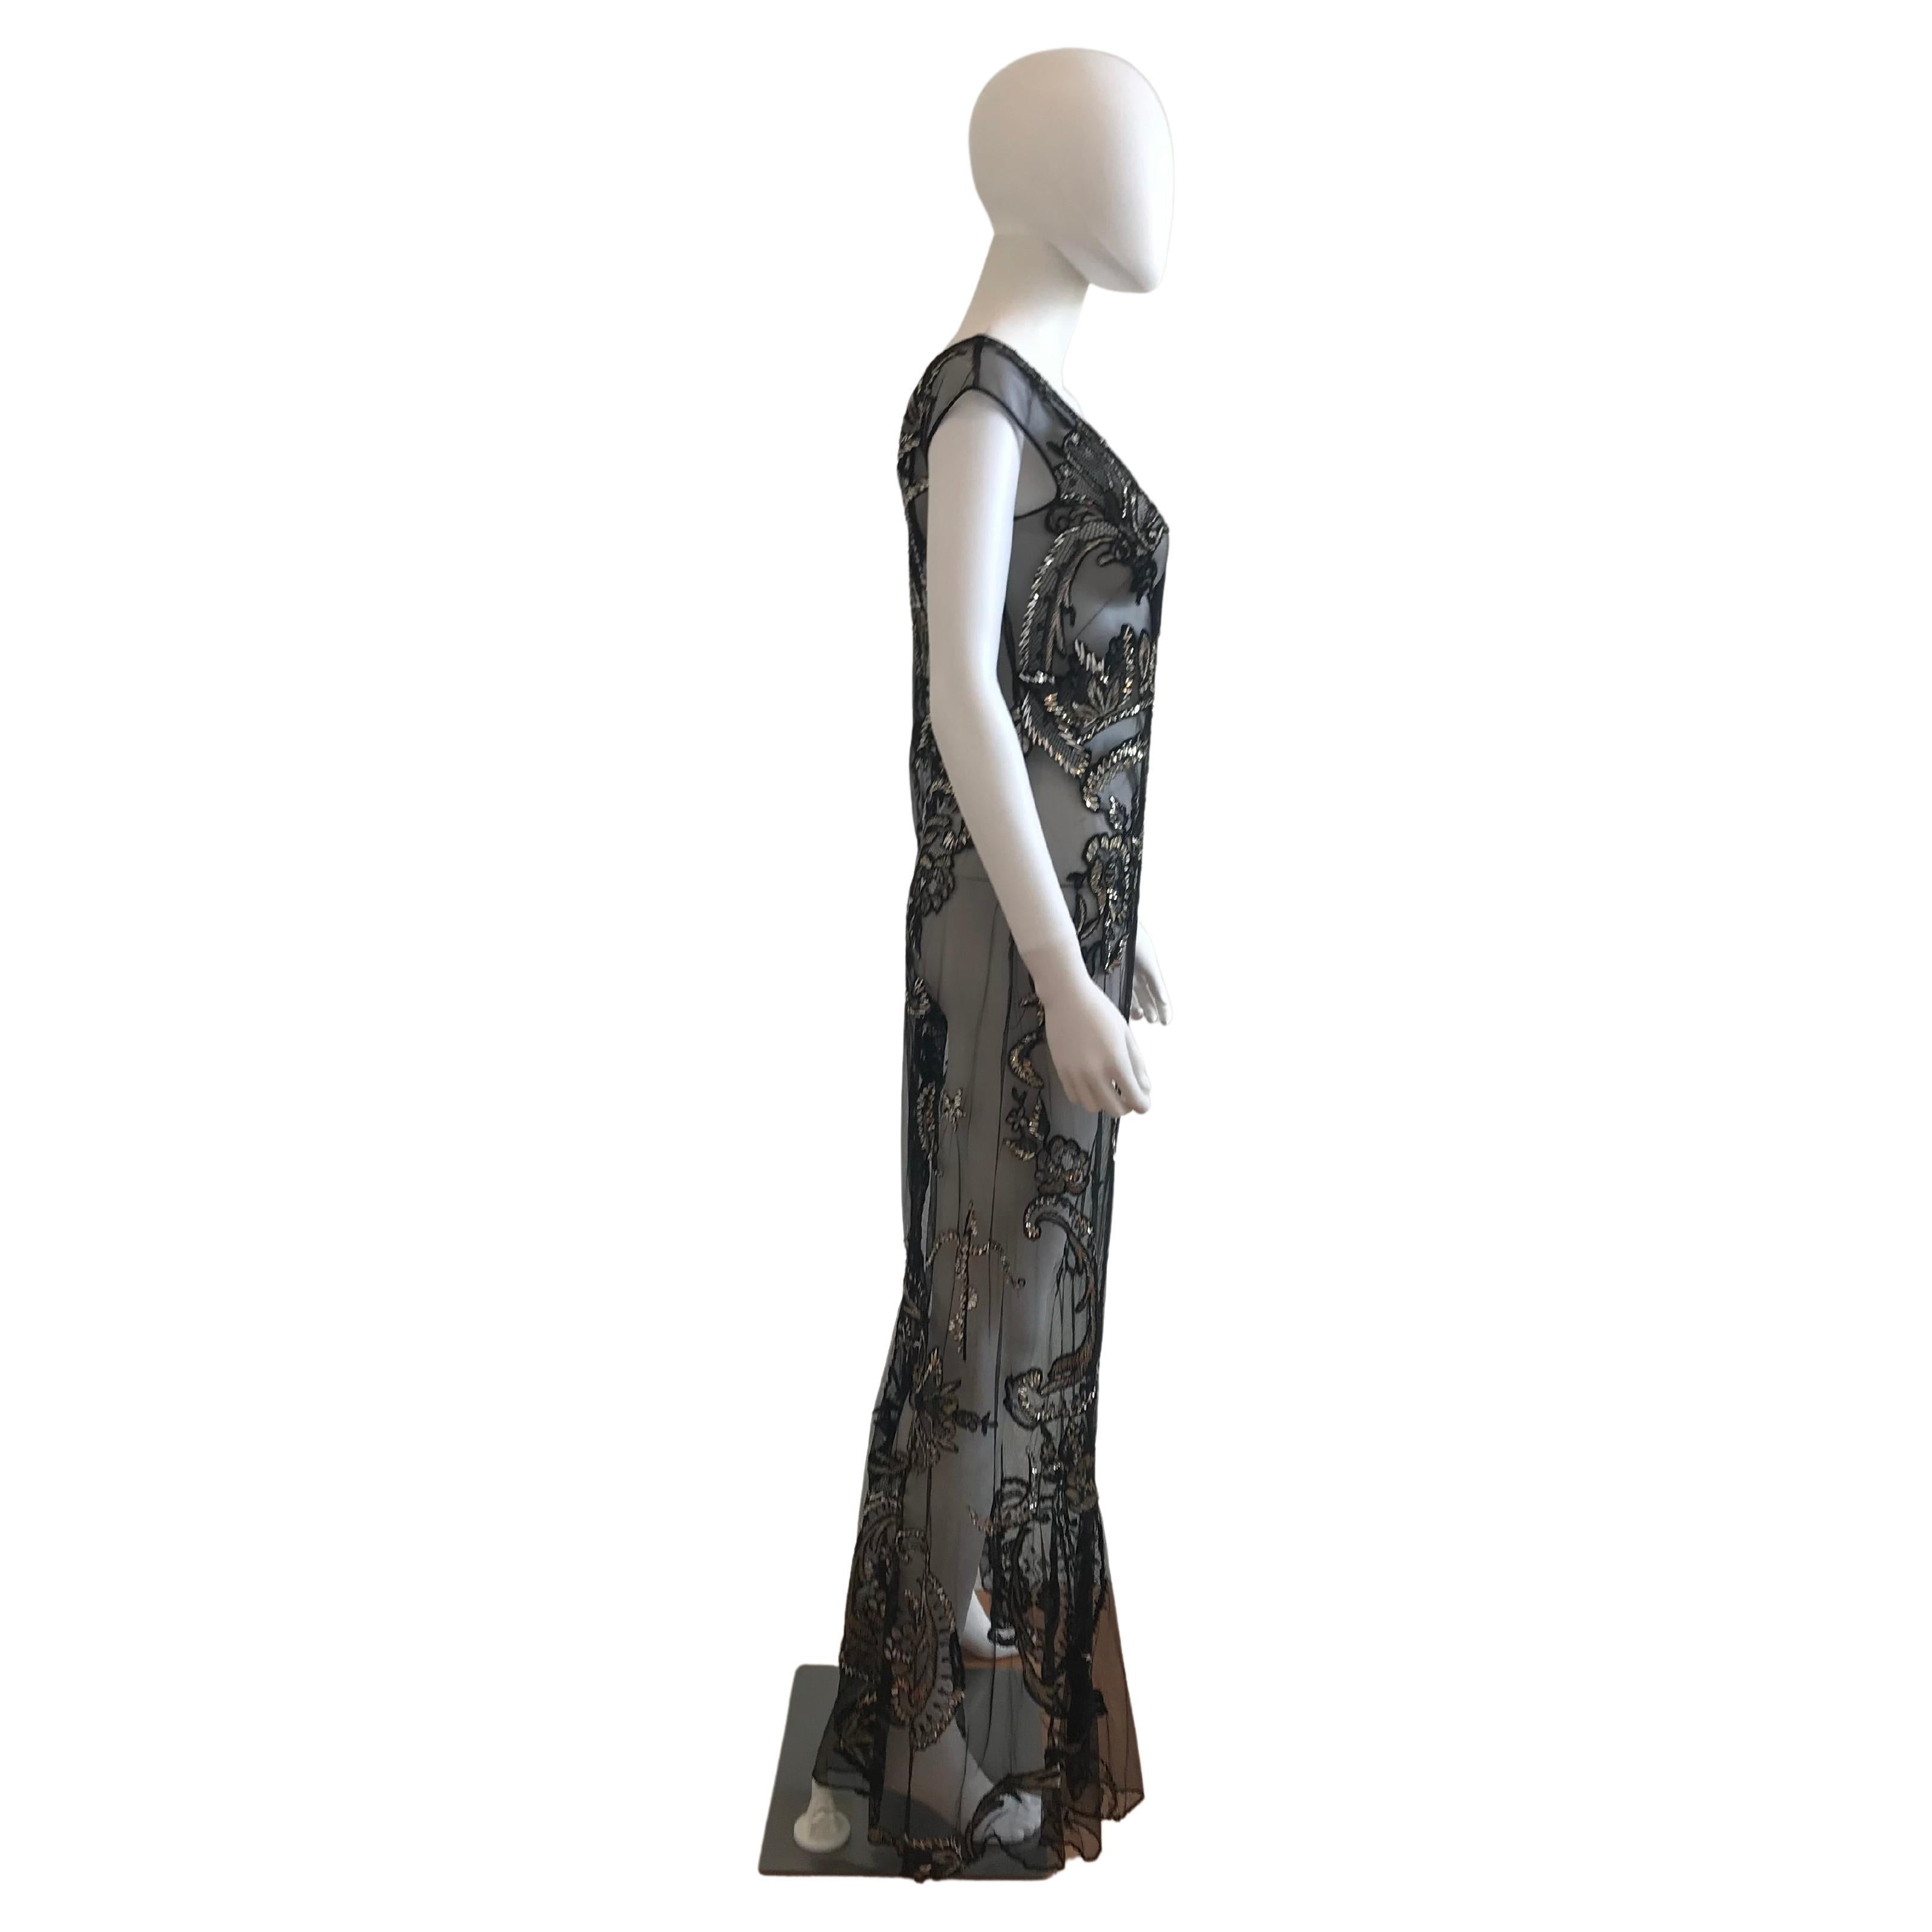 FW 1998 Gianfranco Ferre Metallic Embroidered Tulle Evening Gown For Sale 7